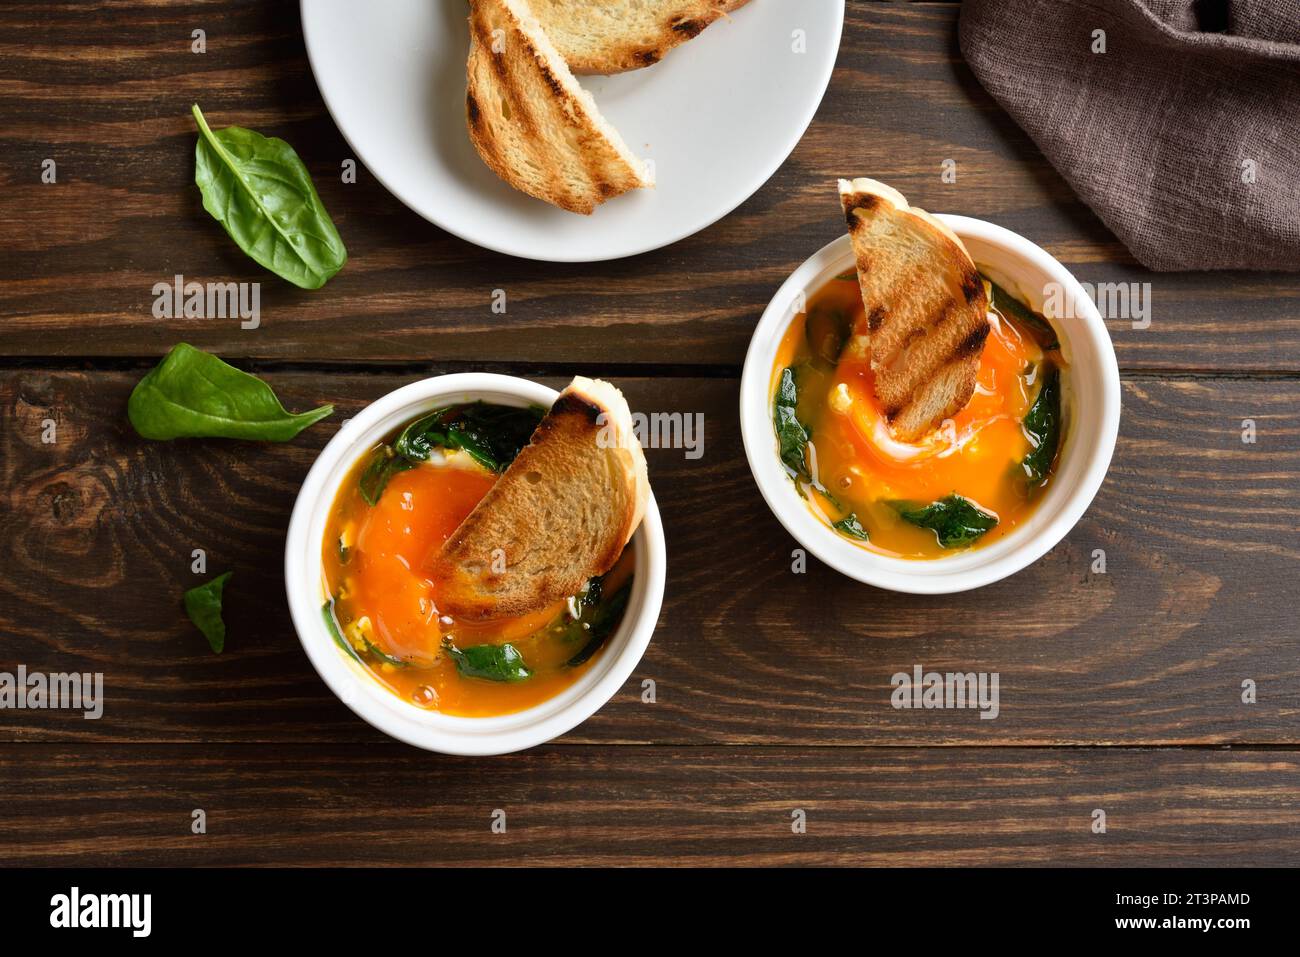 Baked eggs(Eggs en cocotte) in ramekins with cream, сheese and spinach on wooden background. Served with warm toast for dipping. Top view, flat lay Stock Photo